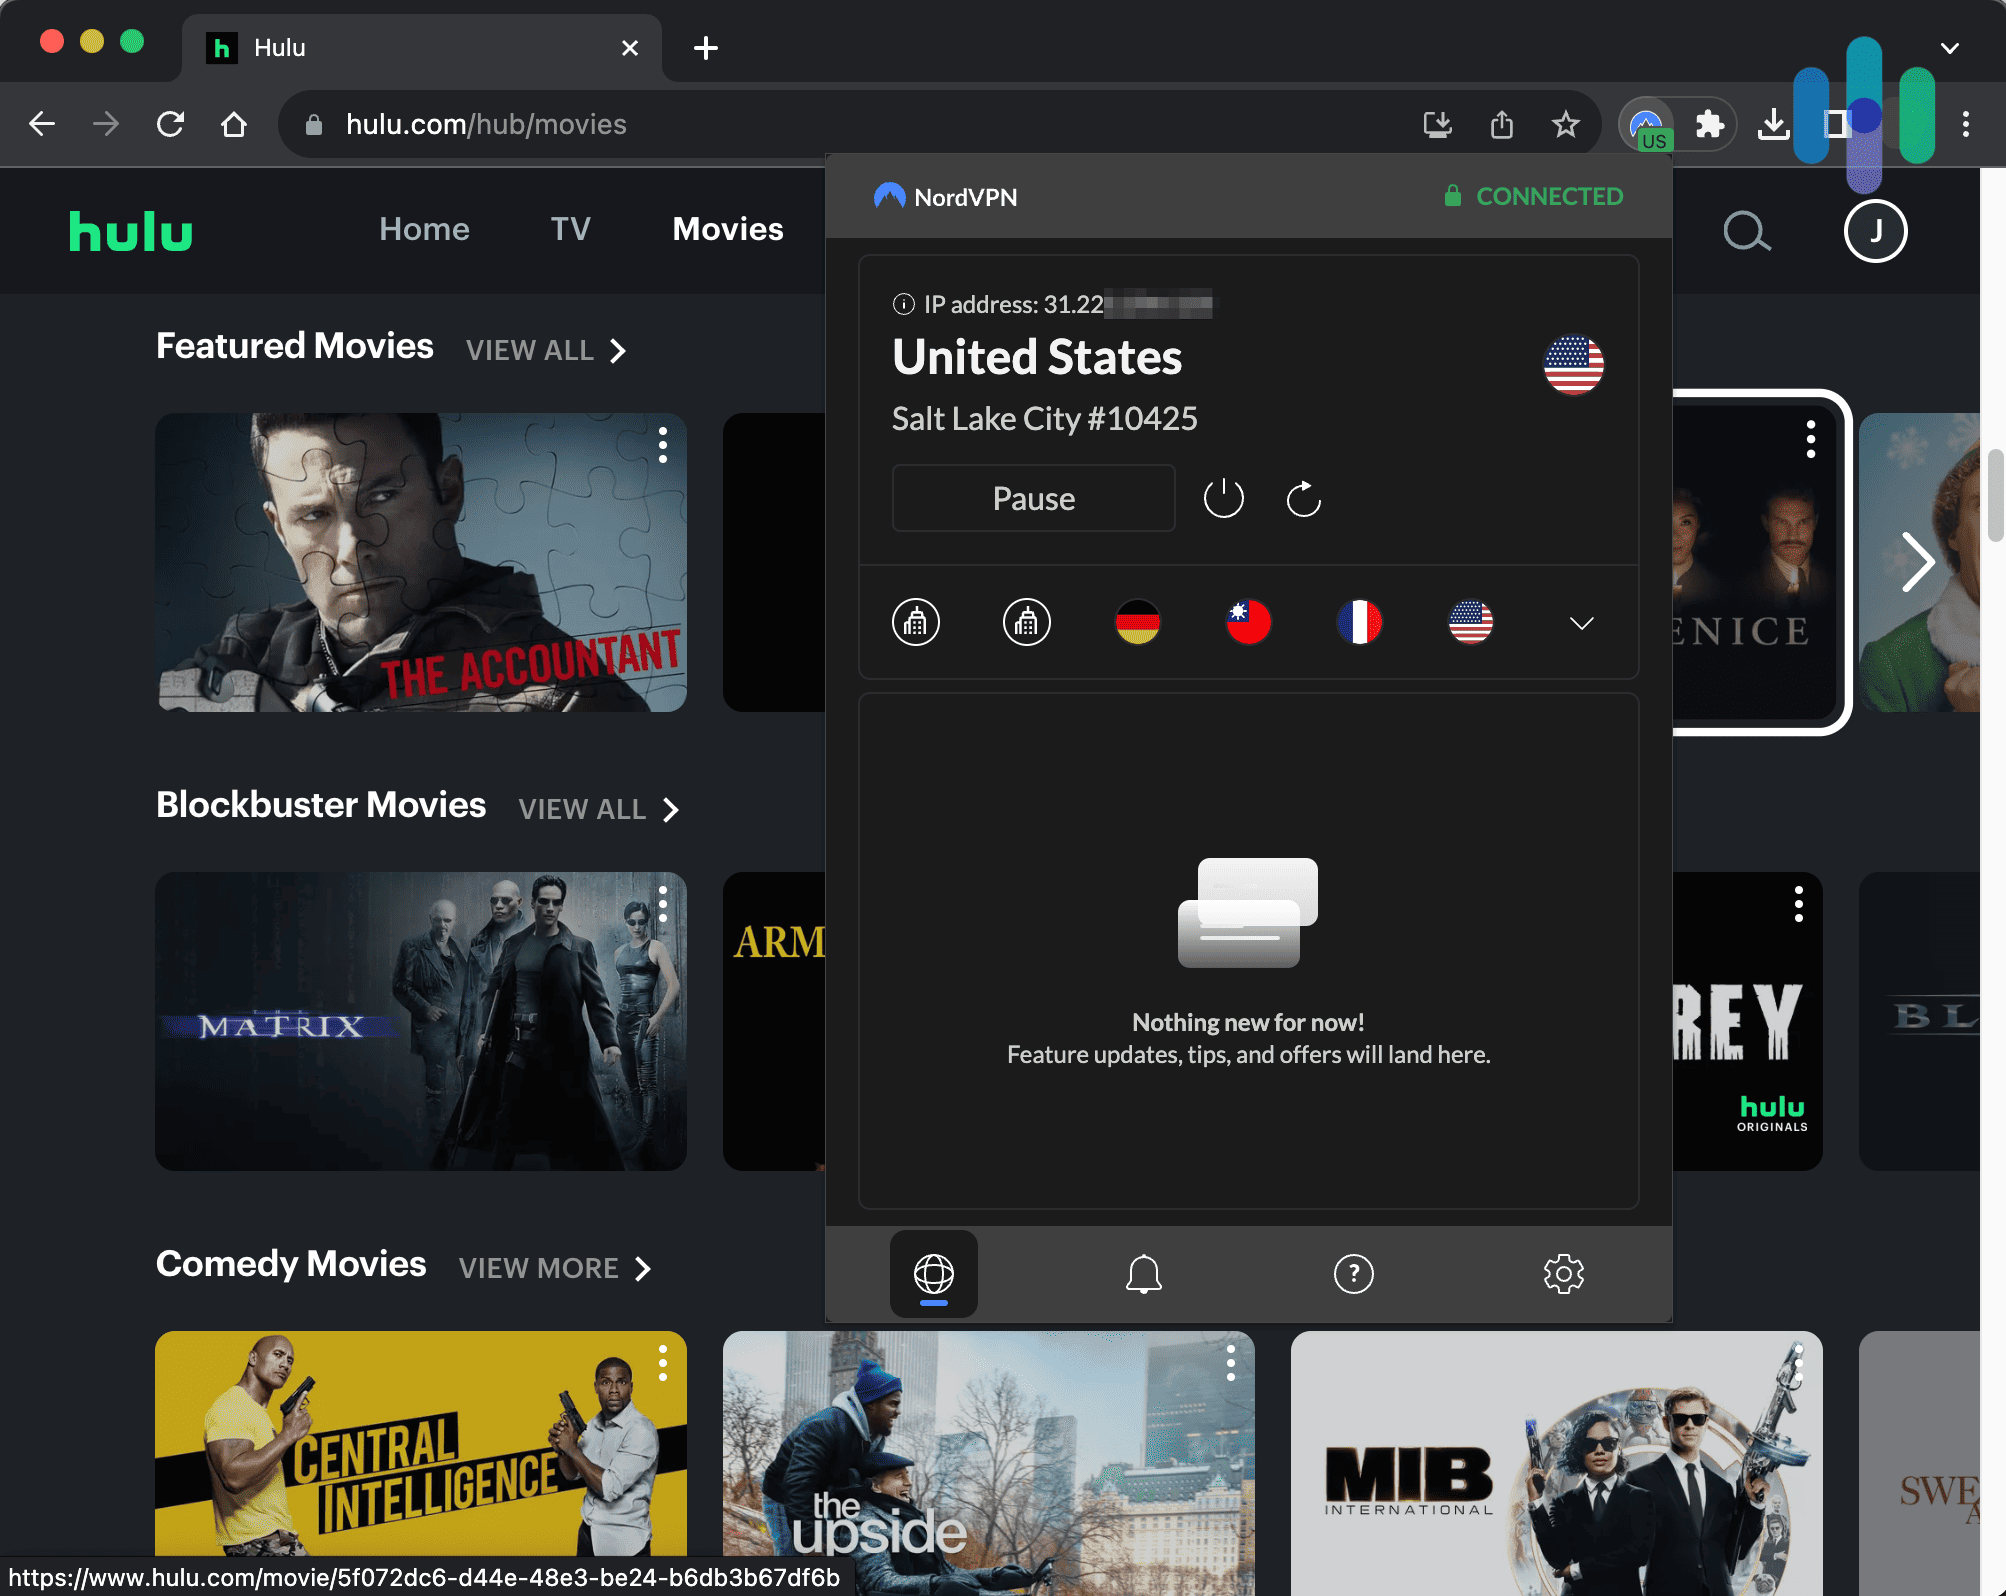 Using NordVPN to change our location to the United States to watch Hulu